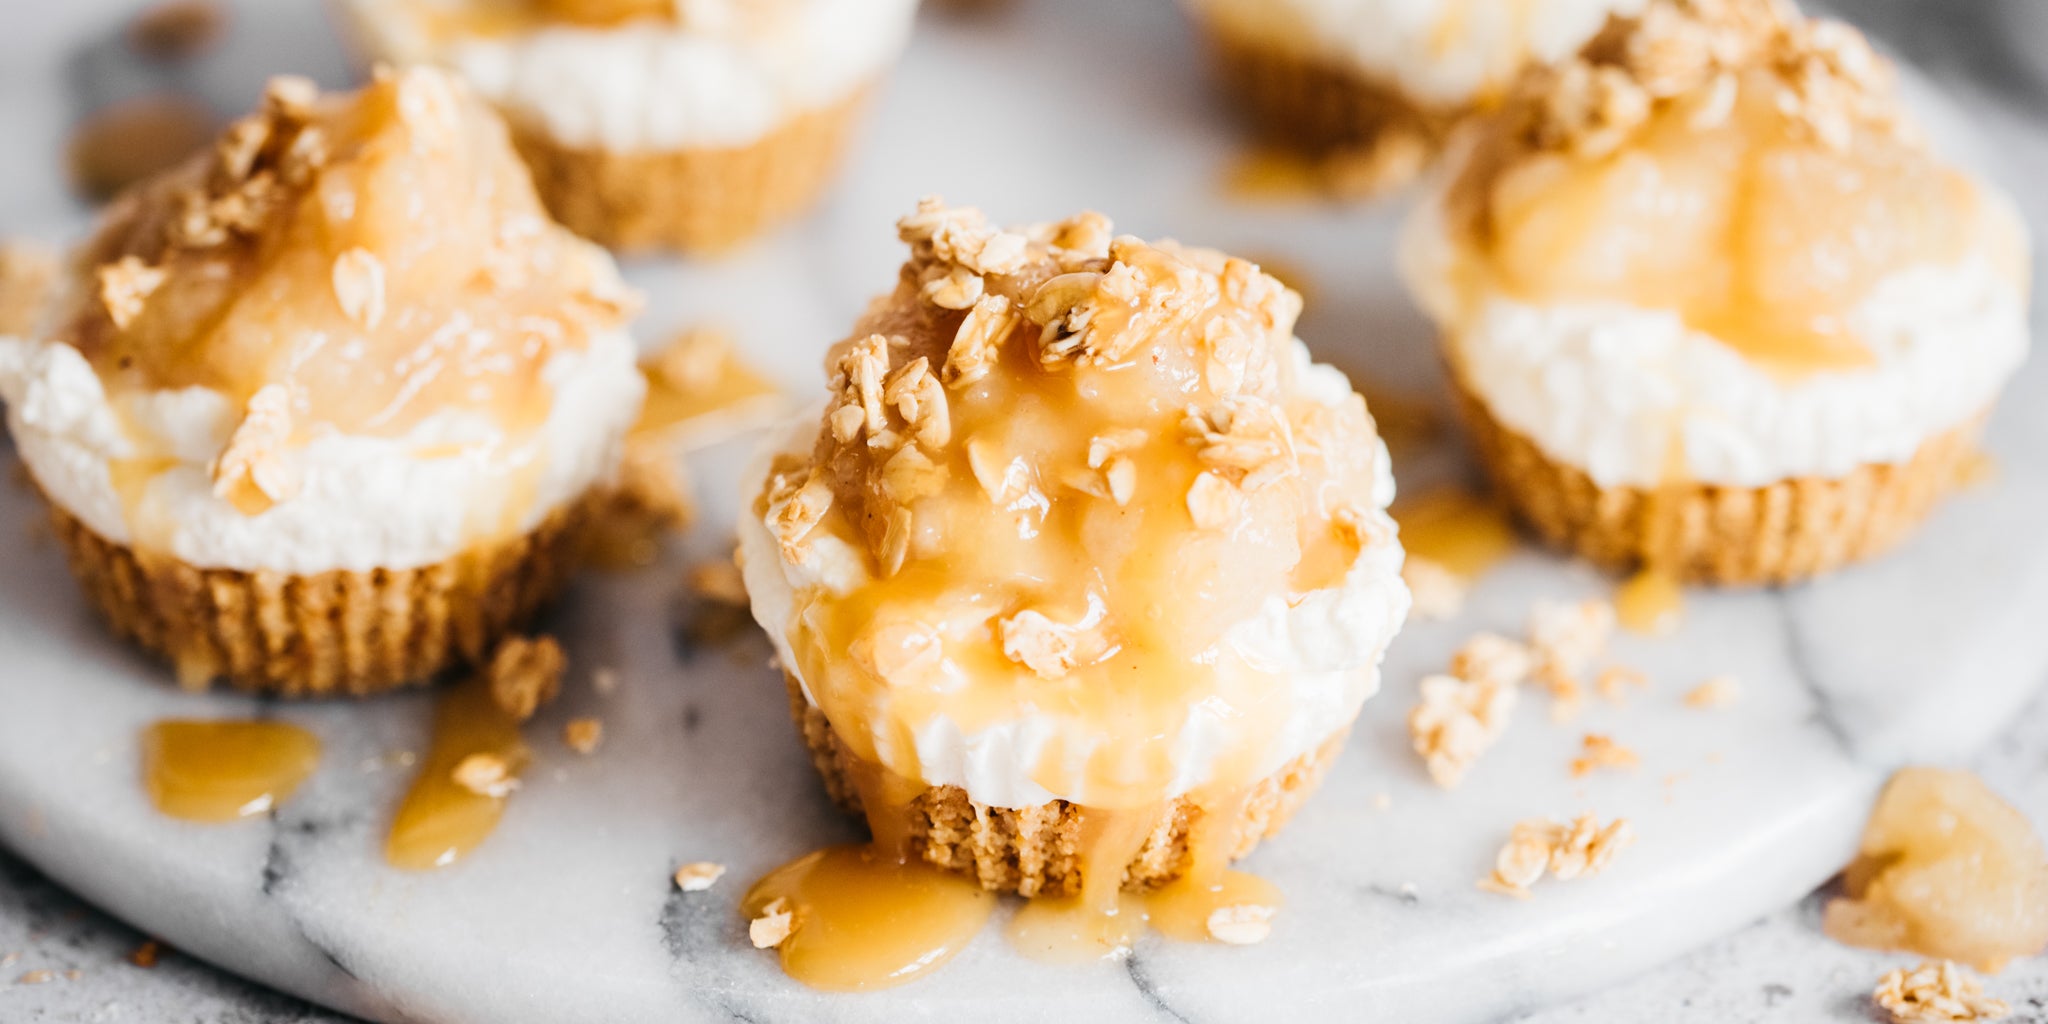 Mini cheesecakes covered in caramel